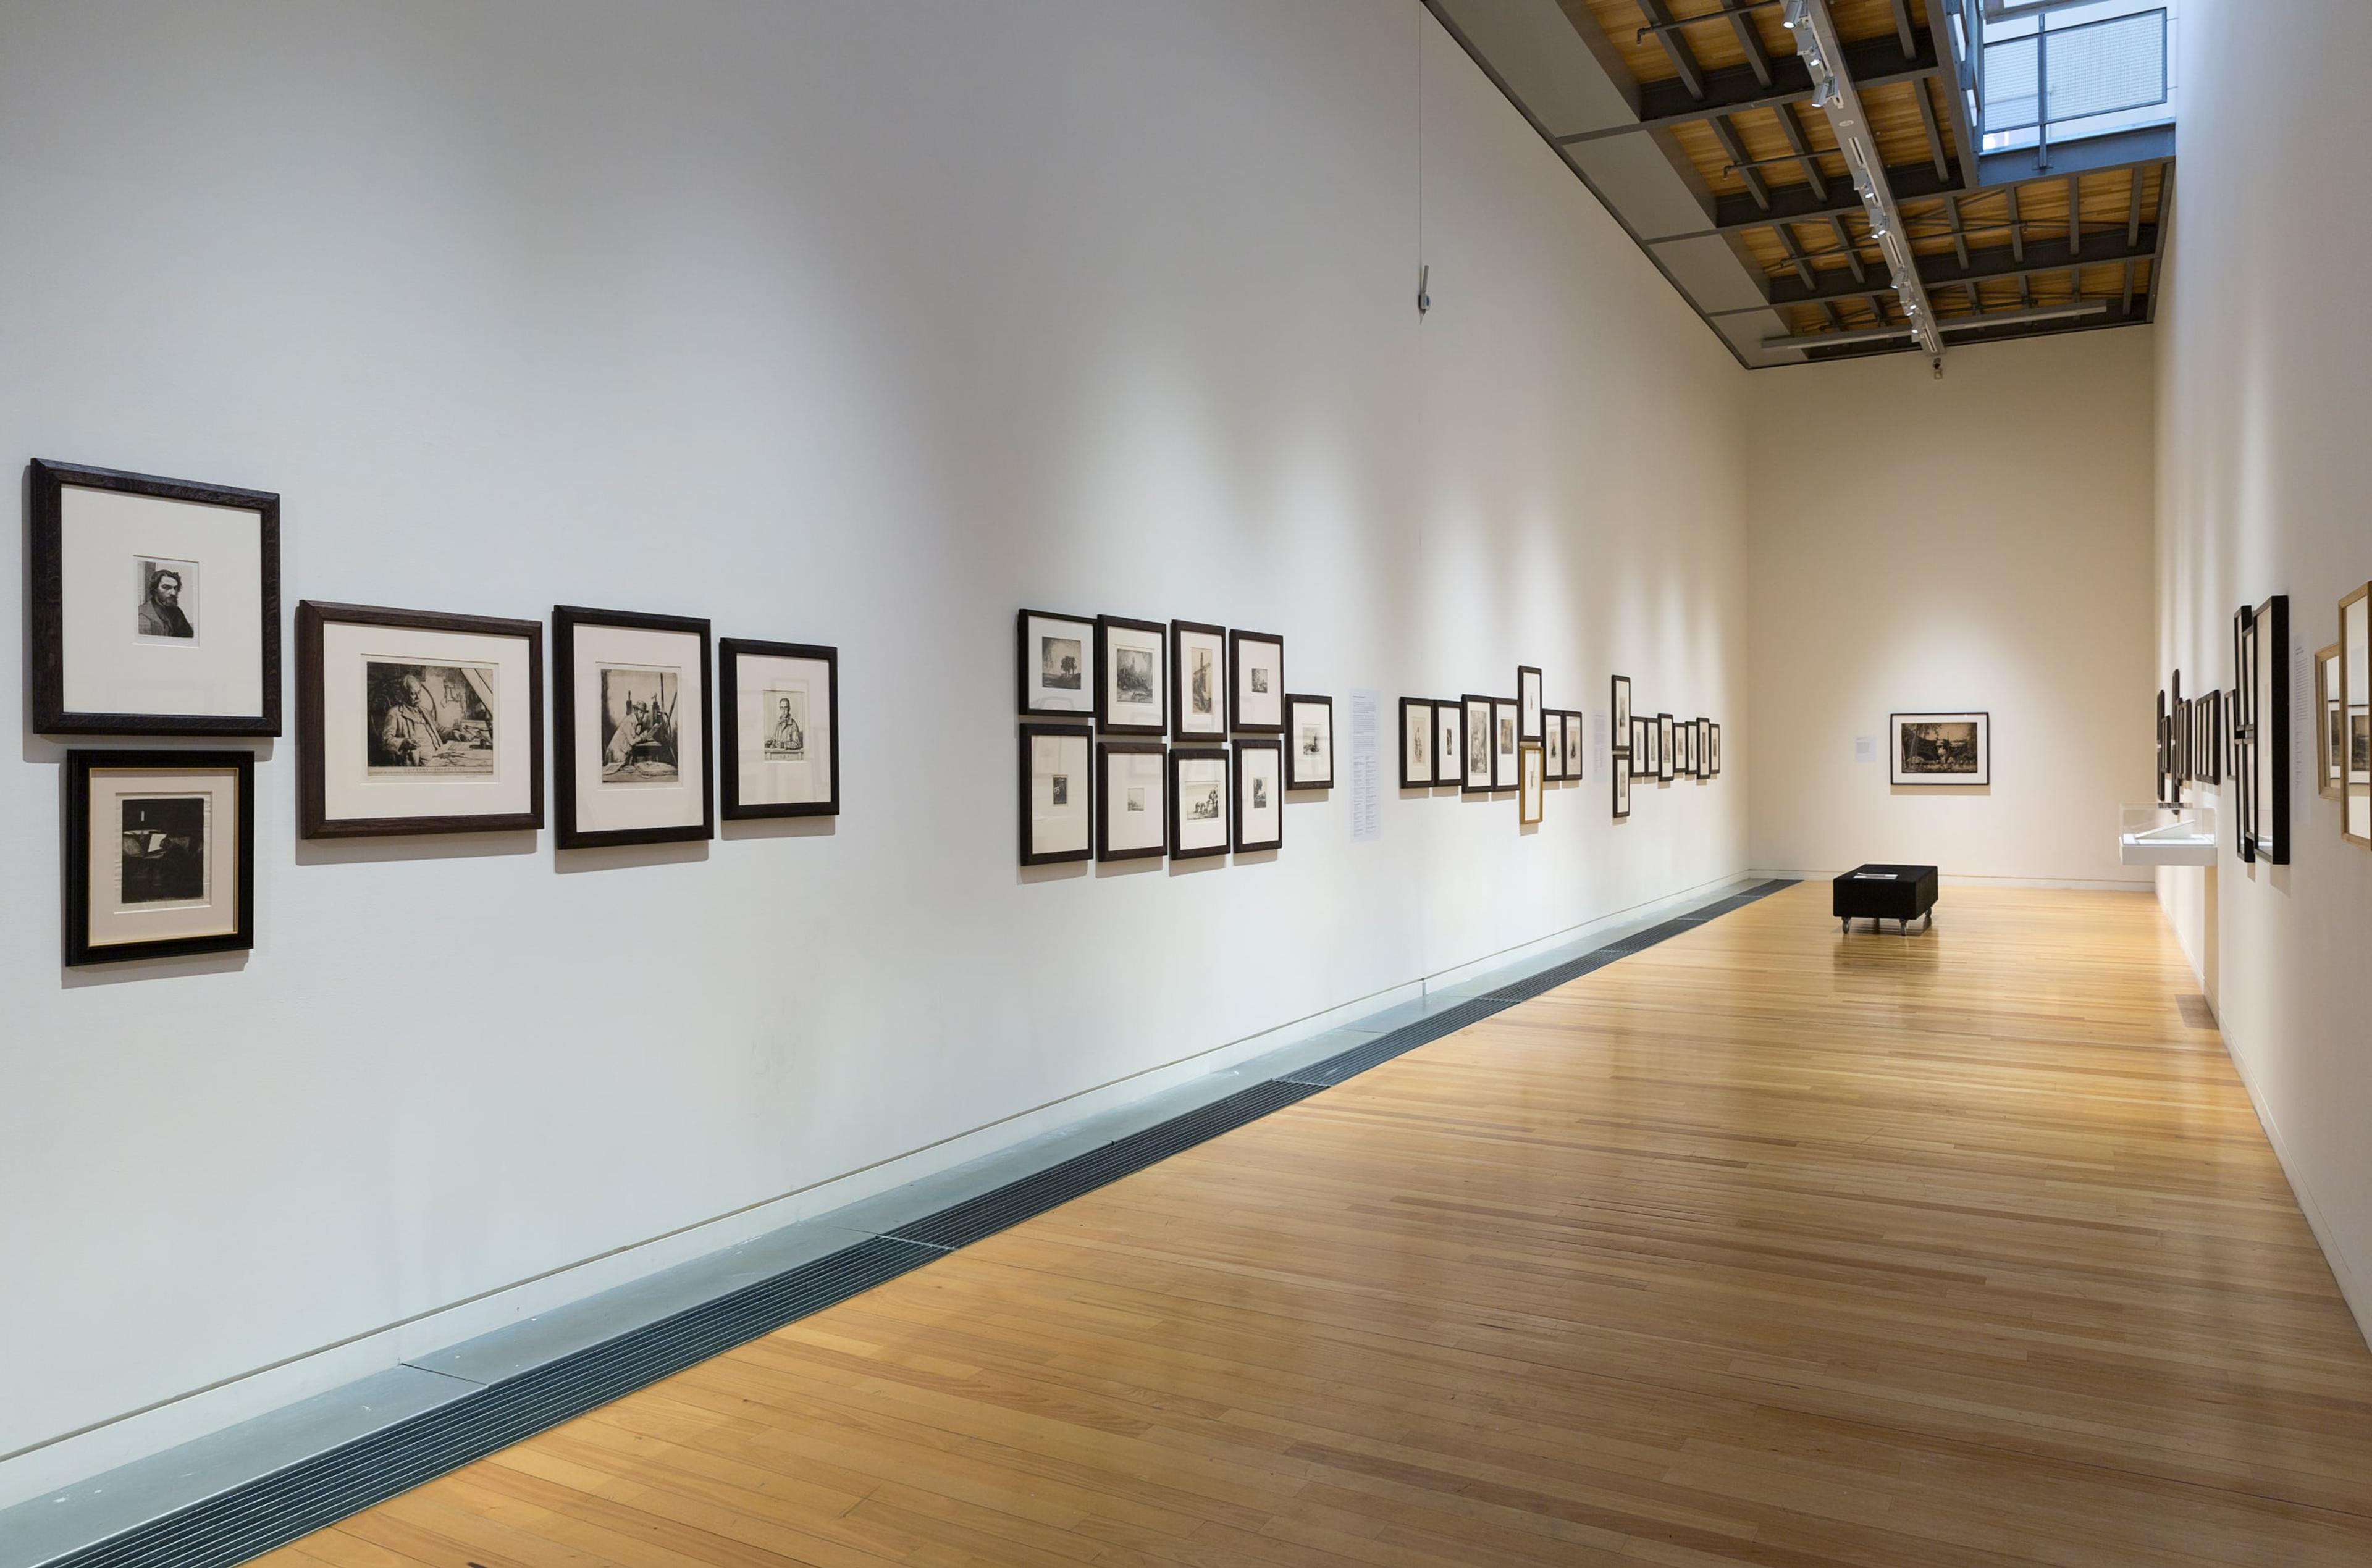 Installation view, Traces of the Wake: The Etching Revival in Britain and Beyond, curated by David Maskill and his ARTH 403 students, Adam Art Gallery Te Pātaka Toi, Victoria University of Wellington, 2015. Photo: Shaun Waugh